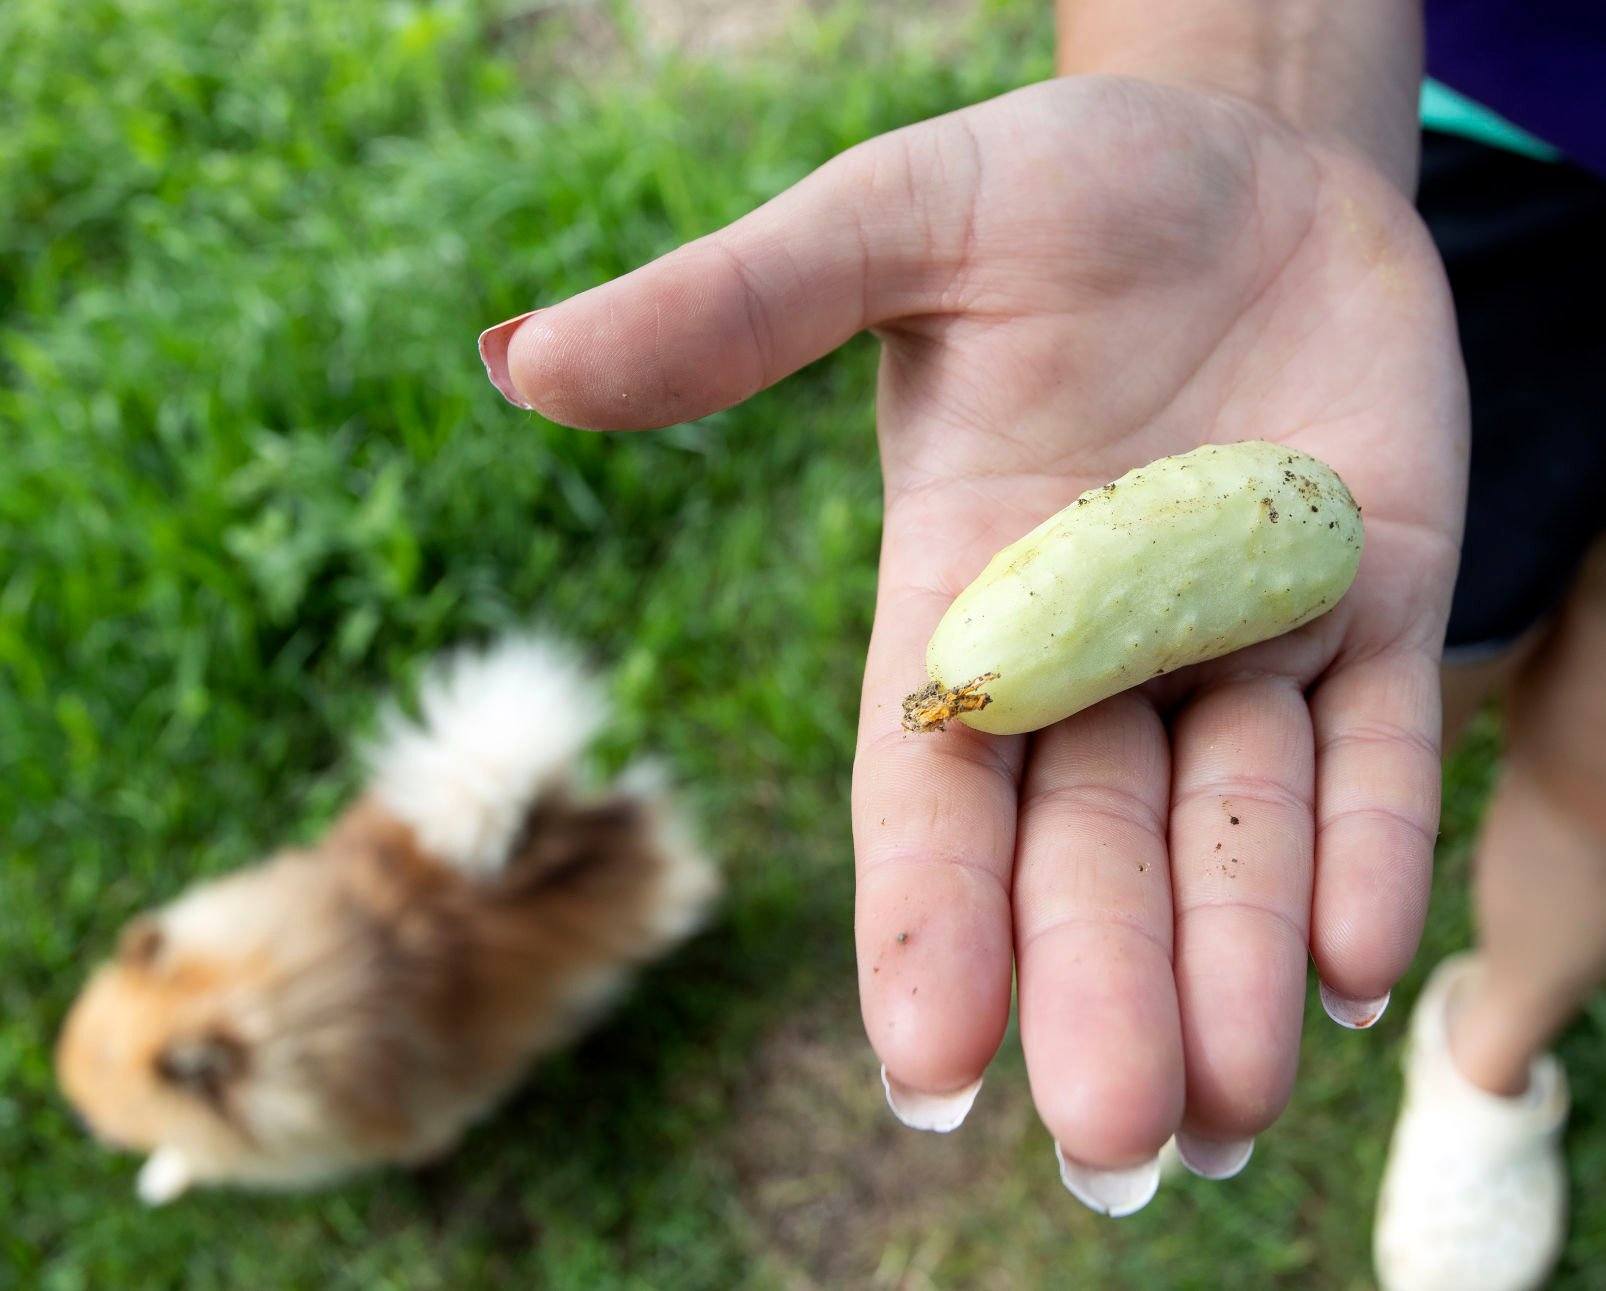 Shelby Knoble, 17, of Fennimore, Wis., displays a white pickle that was picked on her grandparents’ farm in rural Lancaster recently.    PHOTO CREDIT: Stephen Gassman